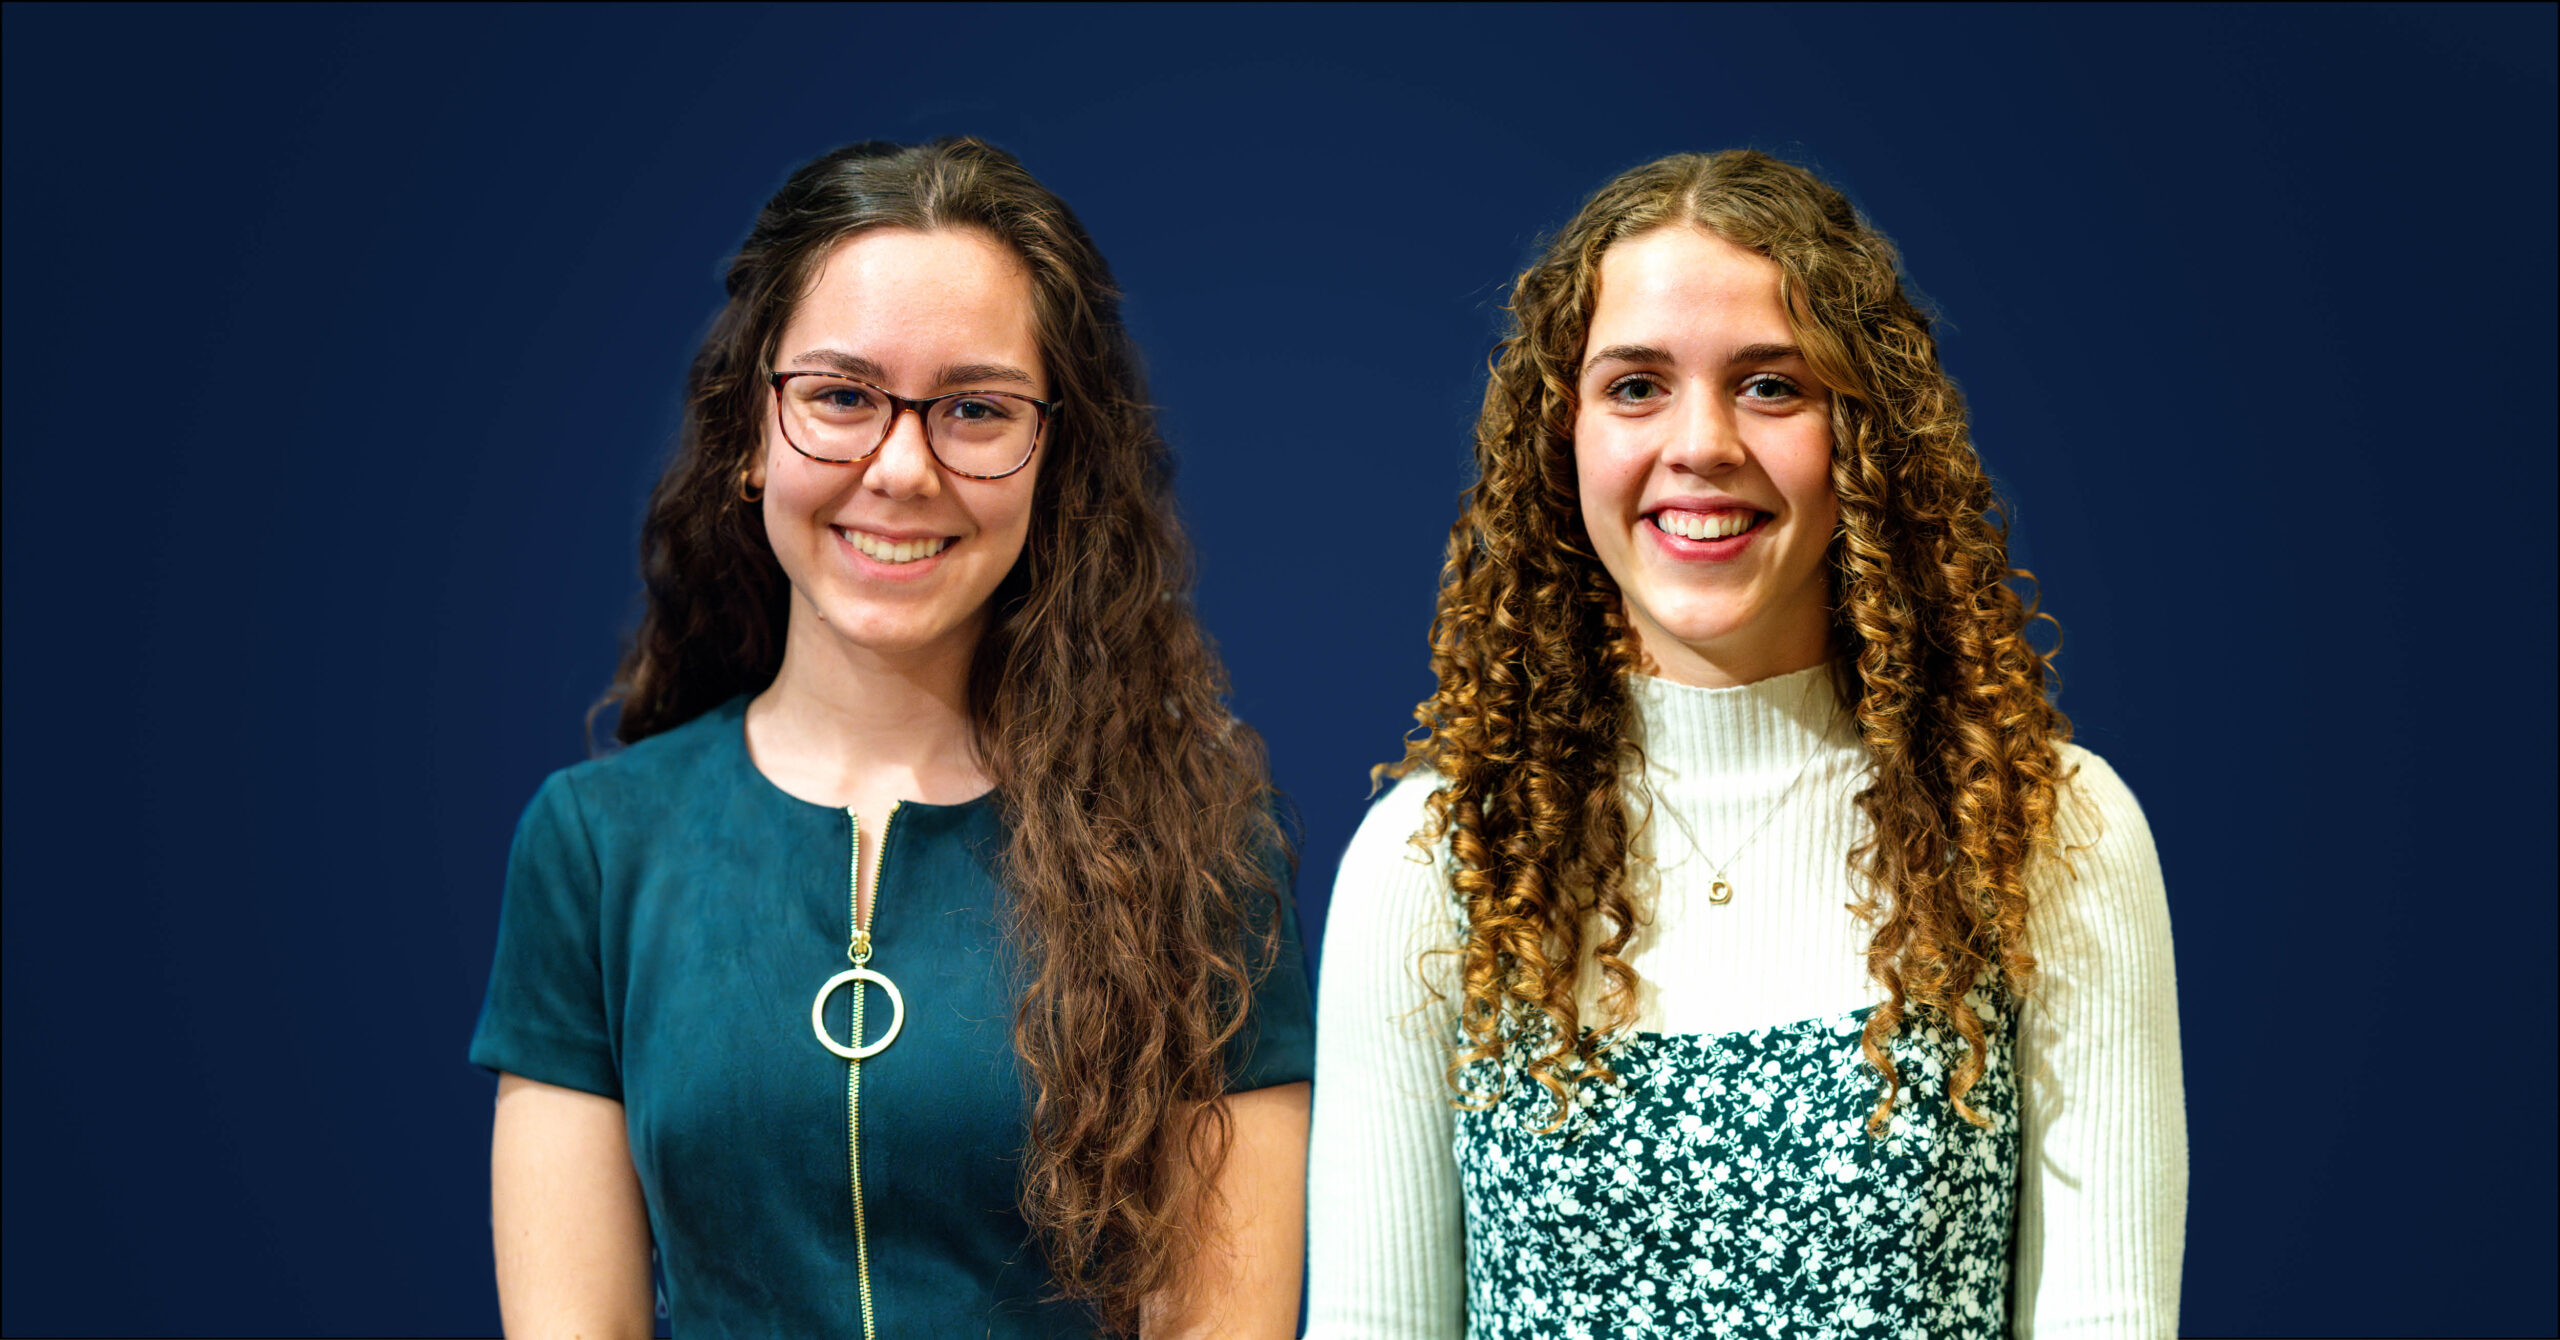 Every year, Trinity accepts extraordinary students who are dedicated to making a difference in the world. The College welcomes two Founders’ Scholars among each freshman class, whose extraordinary spiritual, academic, and social leadership sets them apart.